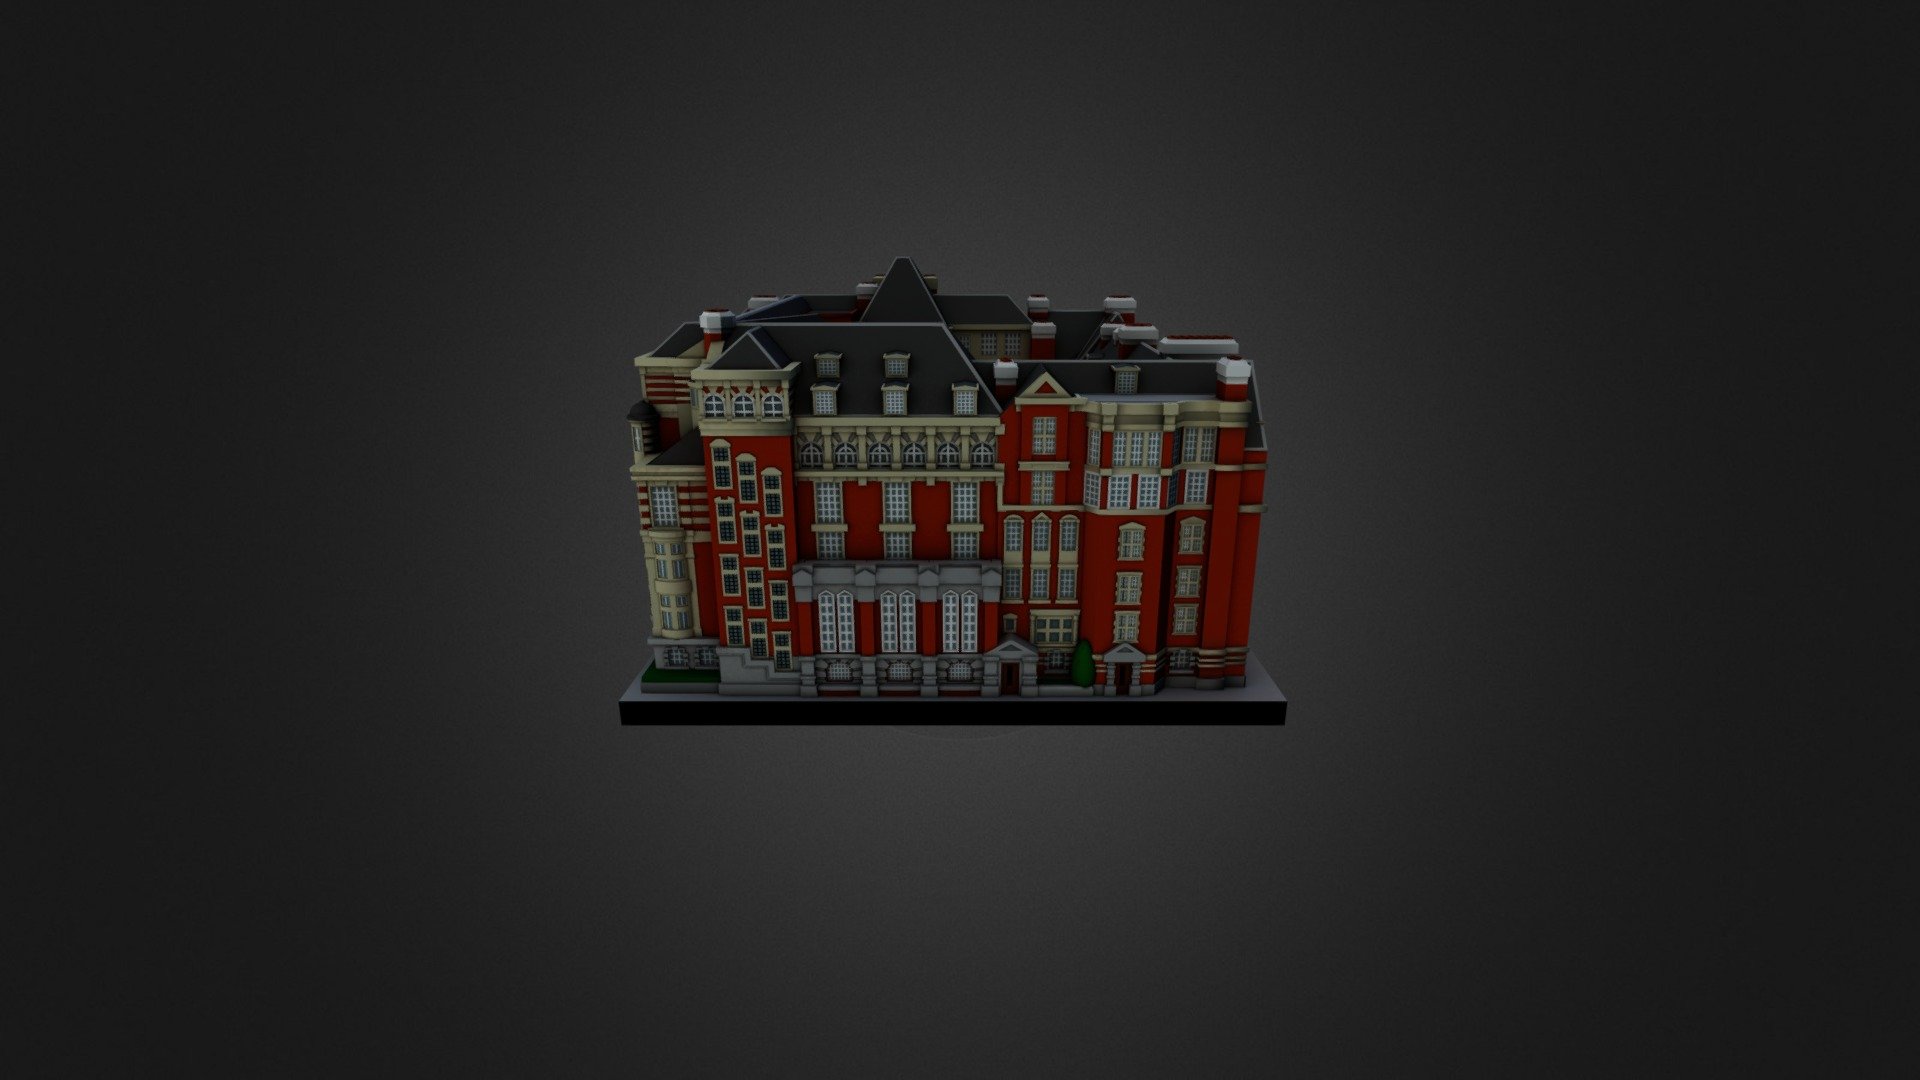 This London building is known as the former Church Commissioners Office. It is available as a ready made full color 3D print from shapeways.com here:
http://shpws.me/FyFL - 3D Printable Church Commissioners Office London - 3D model by ittyblox 3d model